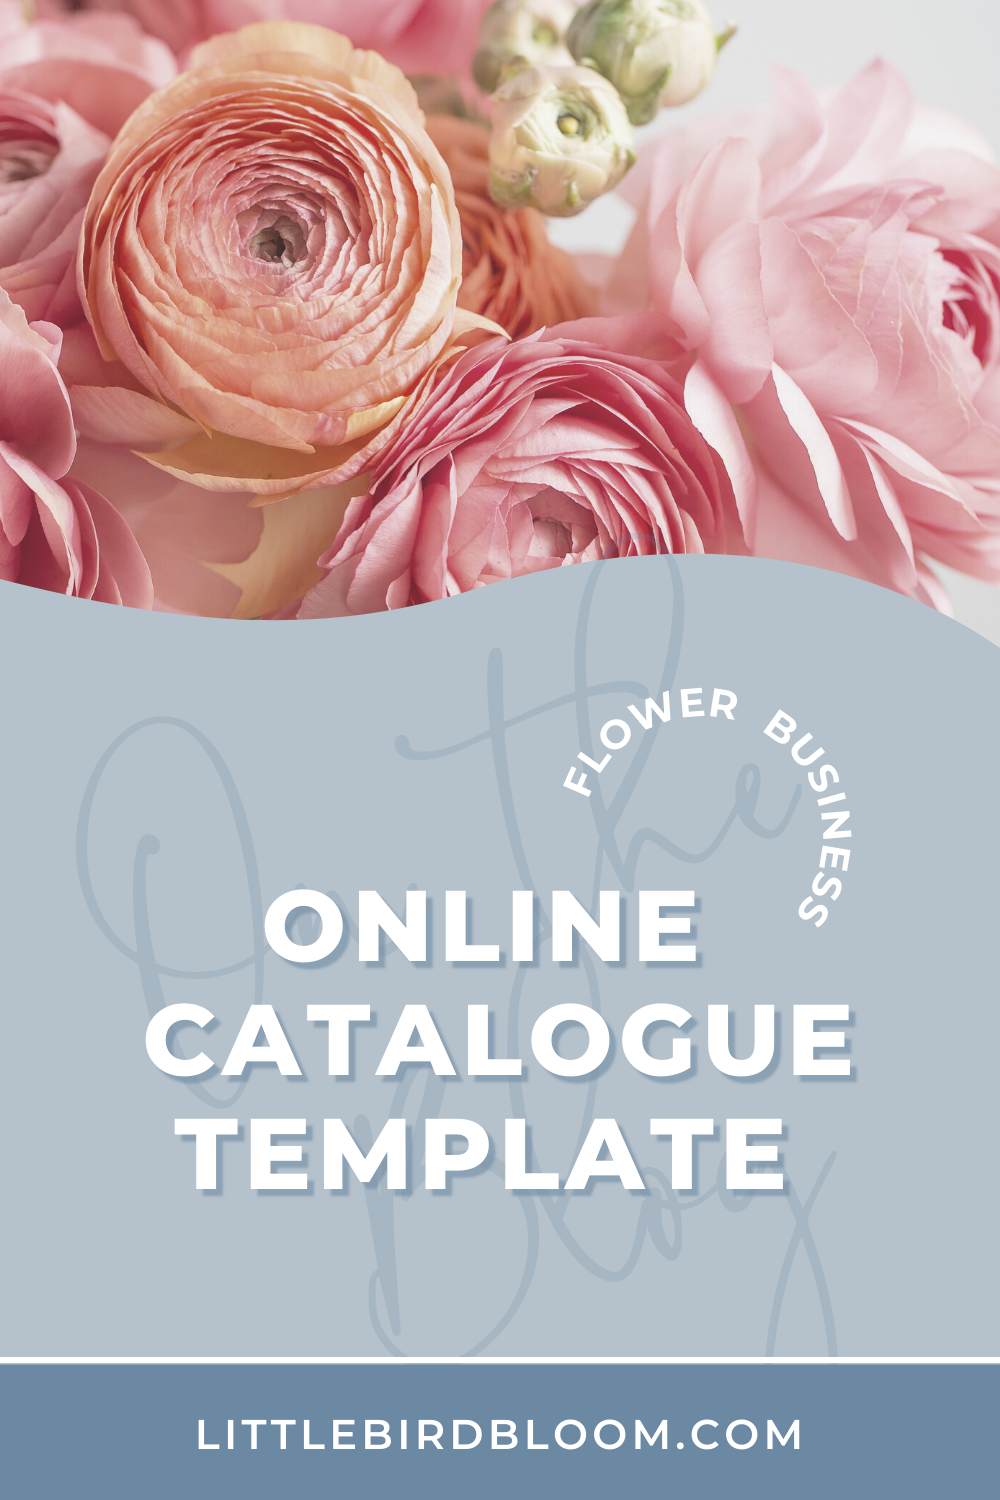 Online Catalogue Template for Flower Business